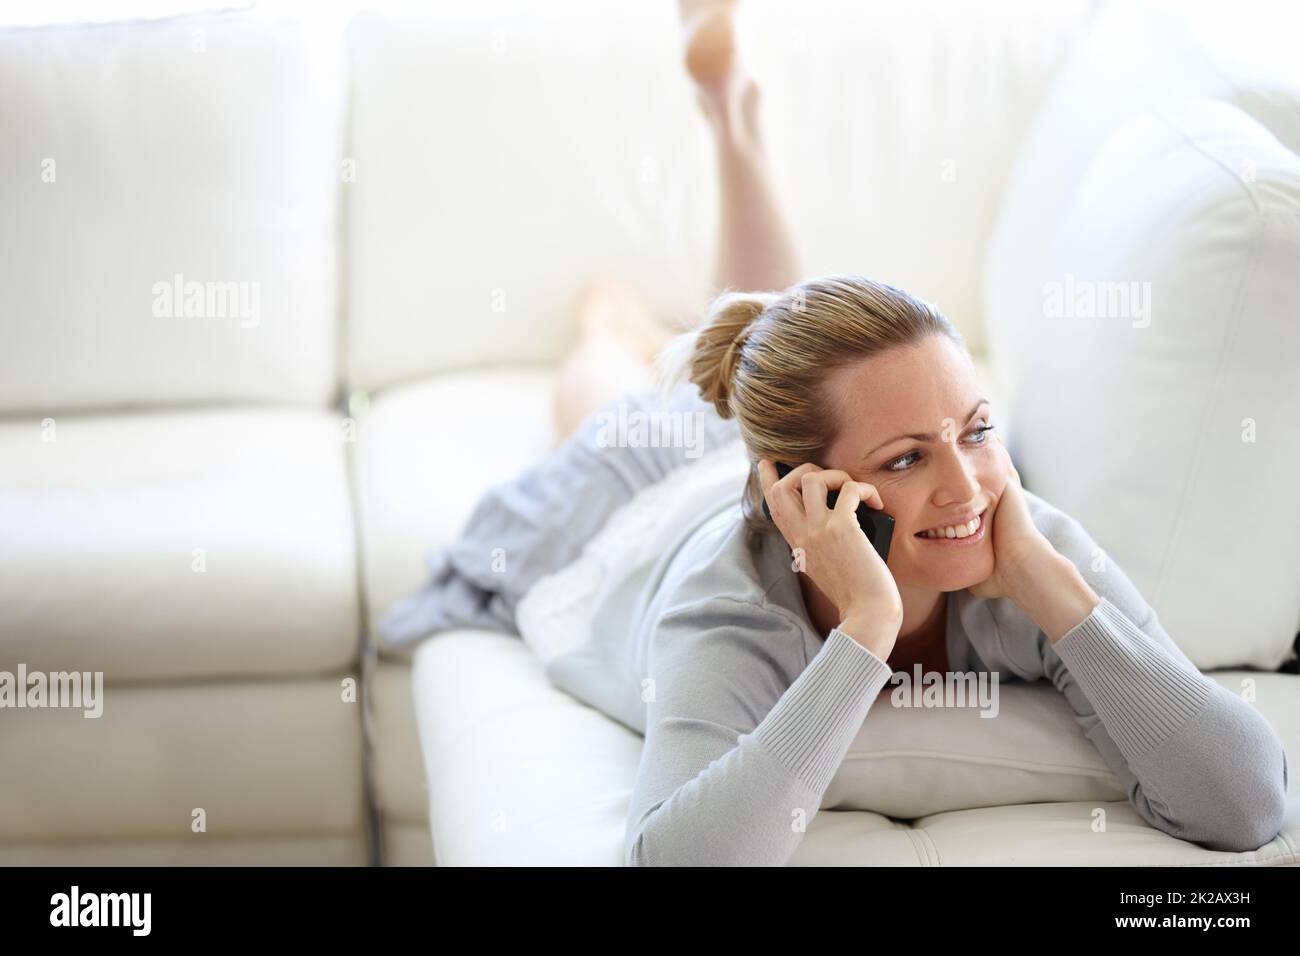 We could talk for hours. A happy young woman using her cellphone while casually lying on a couch. Stock Photo